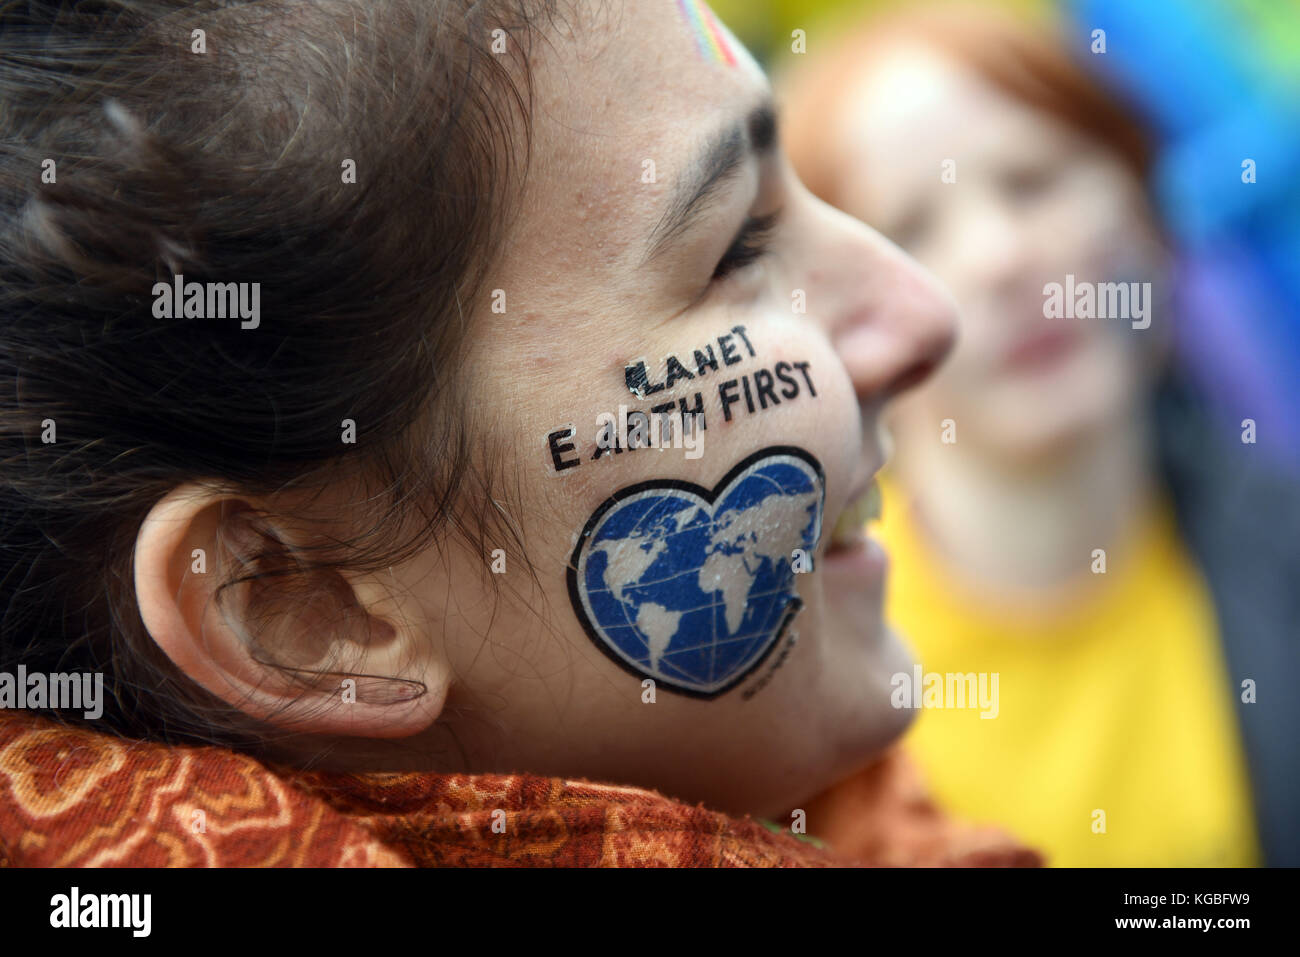 Bonn, Germany. 6th Nov, 2017. A participant of the Greenpeace protest with the slogan 'Kids for Earth' wears an adhesive picture with the text 'Planet Earth First' in Bonn, Germany, 6 November 2017. Credit: Henning Kaiser/dpa/Alamy Live News Stock Photo